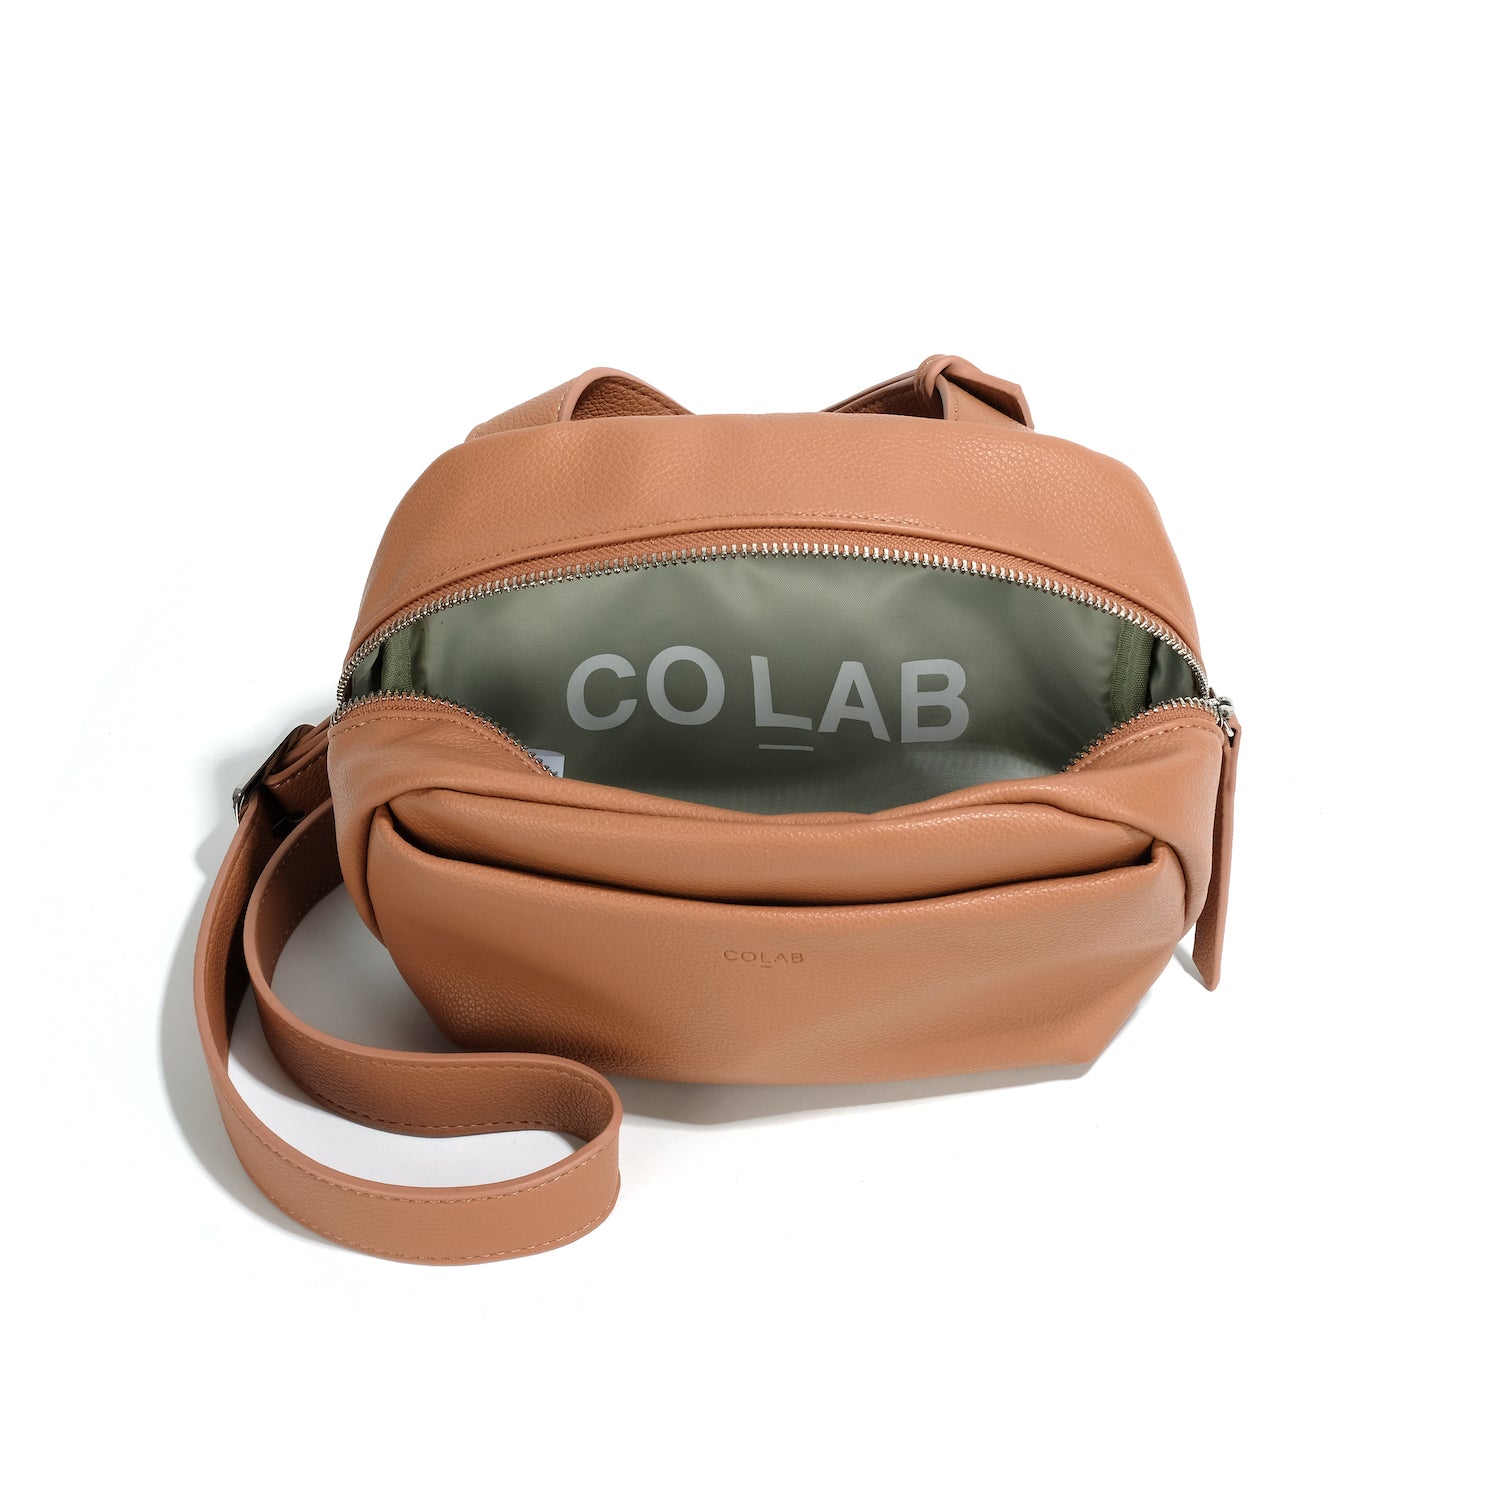 co-lab Eleni Crossbody - Toffee Accessories - Other Accessories - Handbags & Wallets by co-lab | Grace the Boutique